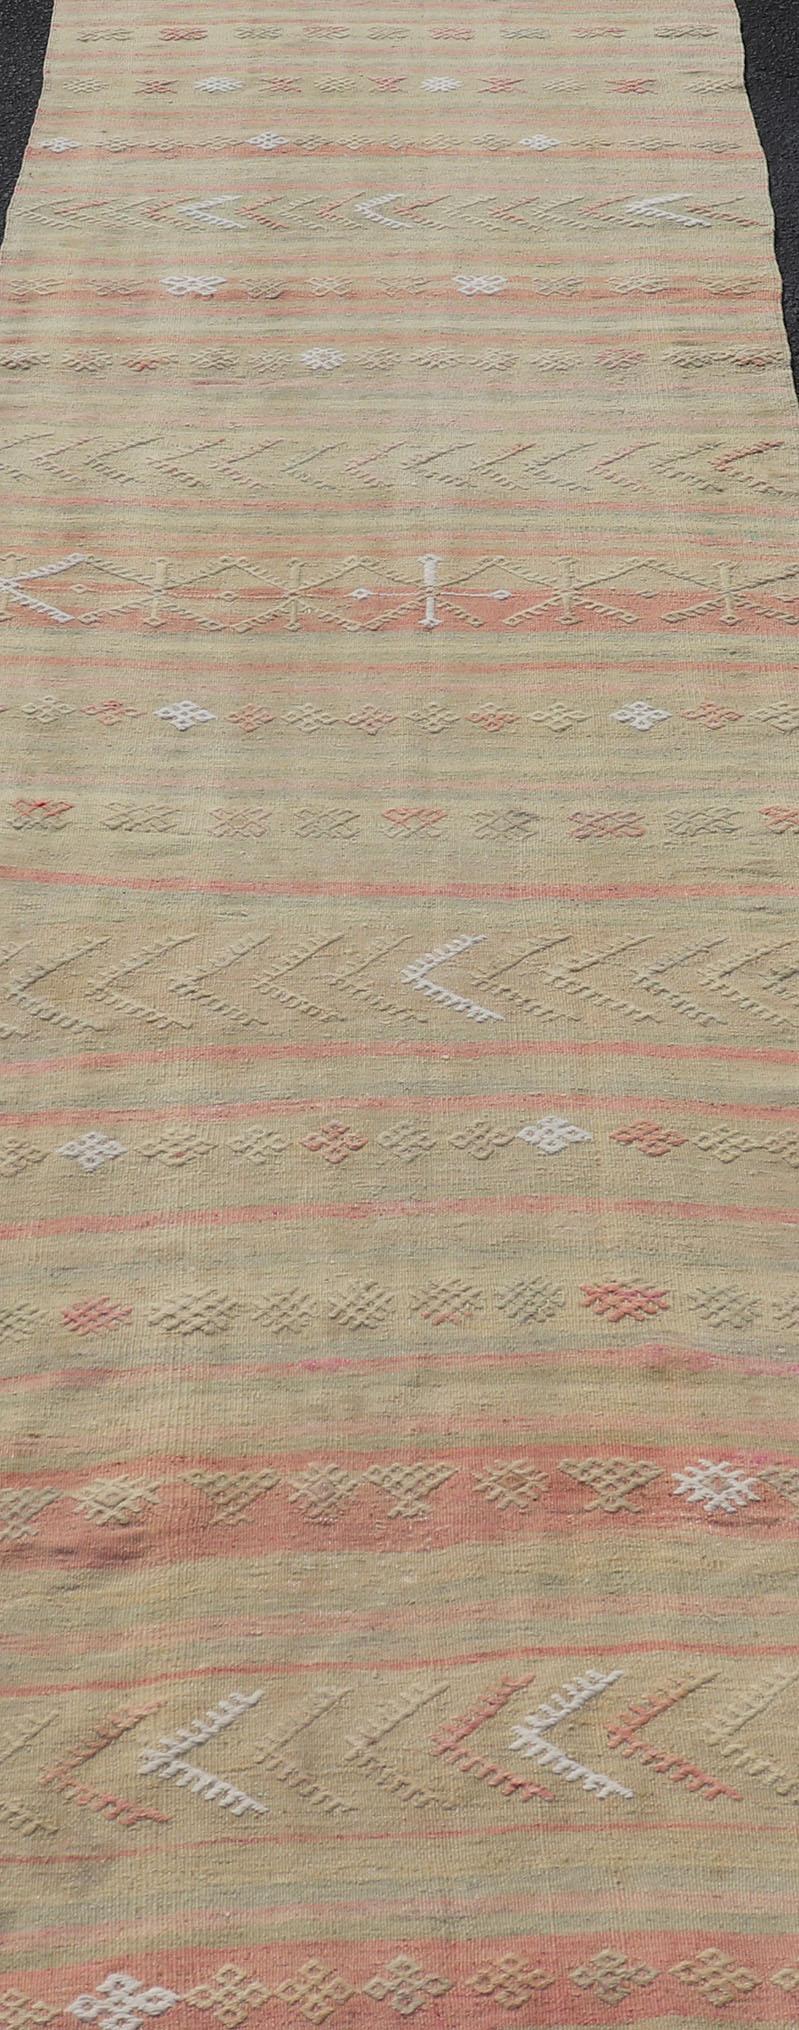 Wool Vintage Striped Turkish Kilim Runner with Stripes in Tan, Ivory, & Light Coral For Sale